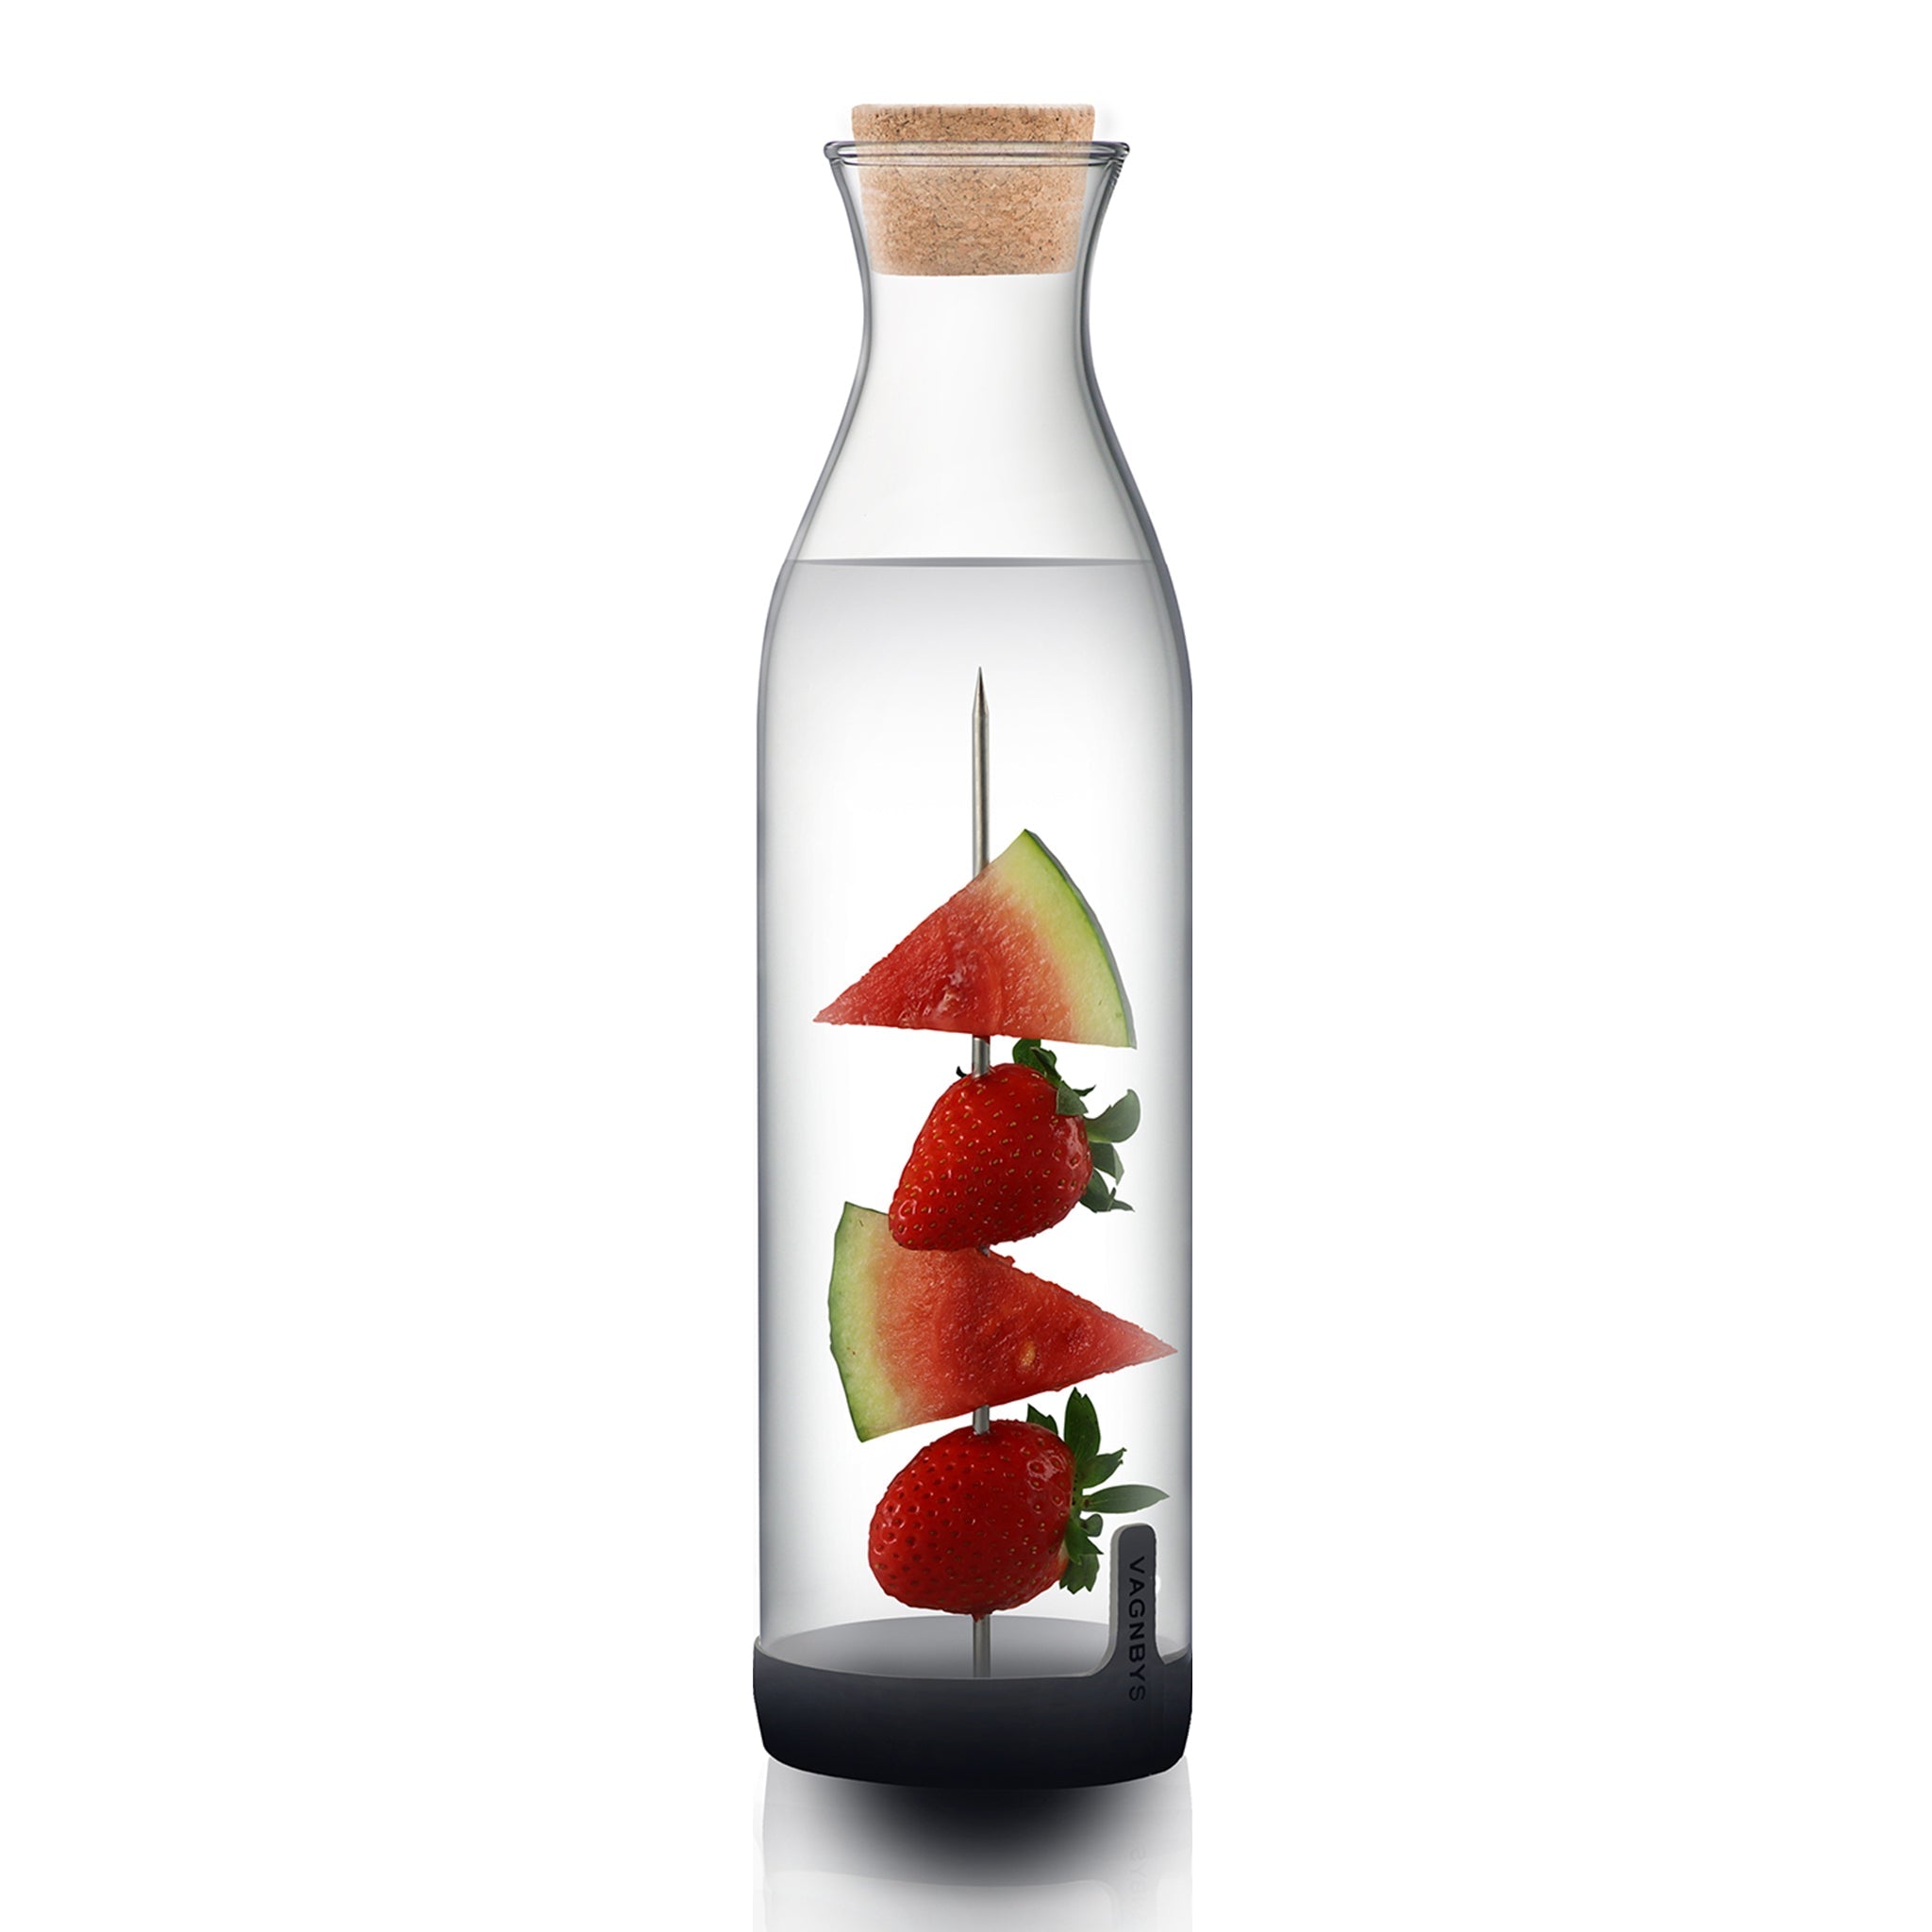  Vagnbys® Cool Carafe by Ethan+Ashe Ethan+Ashe Perfumarie